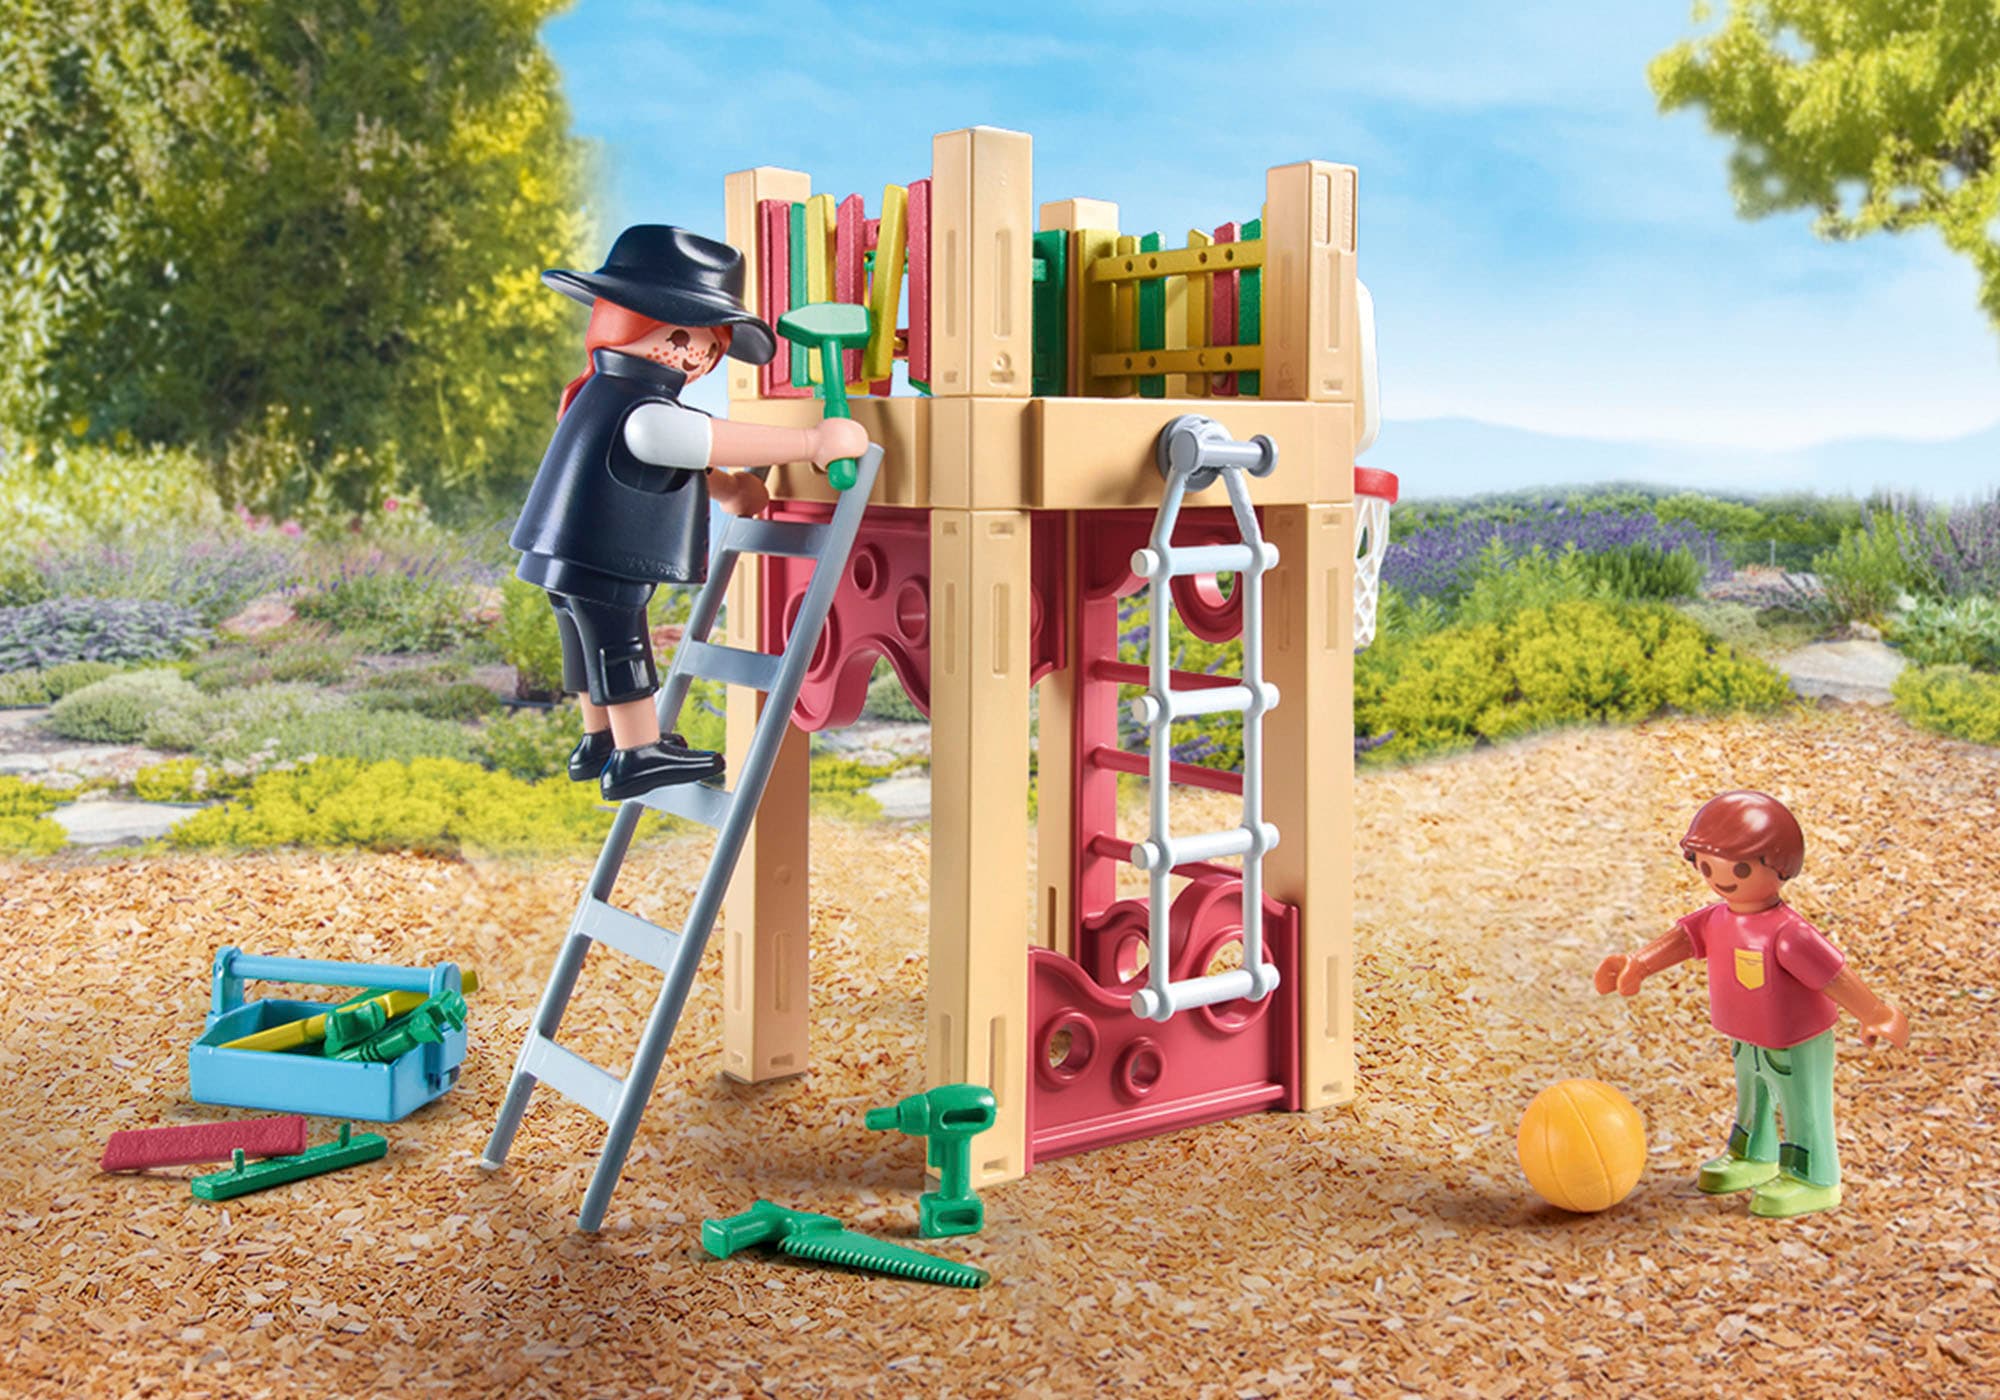 Playmobil® Konstruktions-Spielset »Zimmerin on tour (71475), City Life«, (58 St.), Spielturm, teilweise aus recyceltem Material; Made in Europe